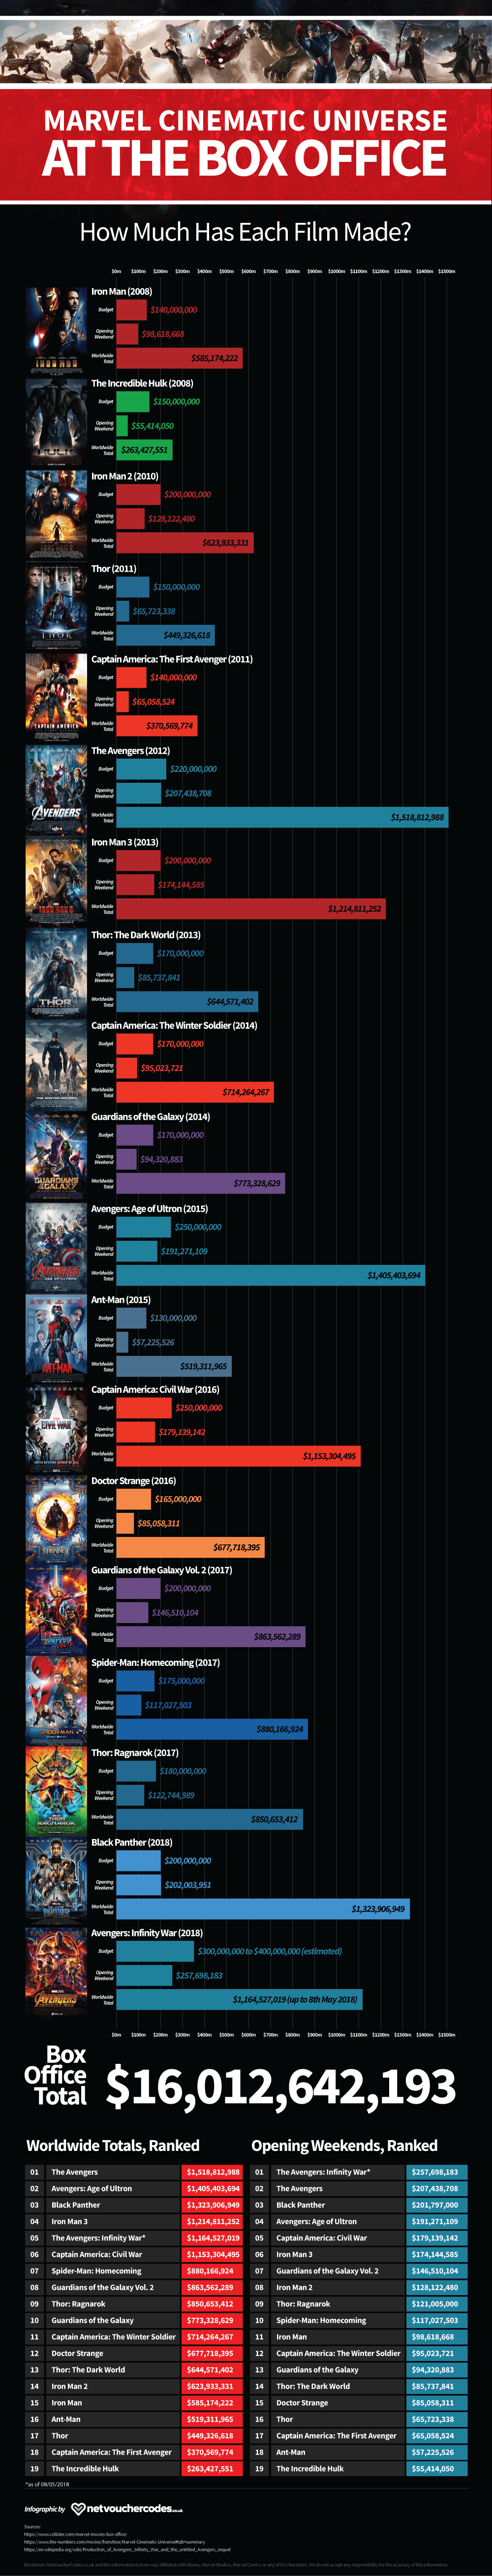 marvel-box-office-to-date